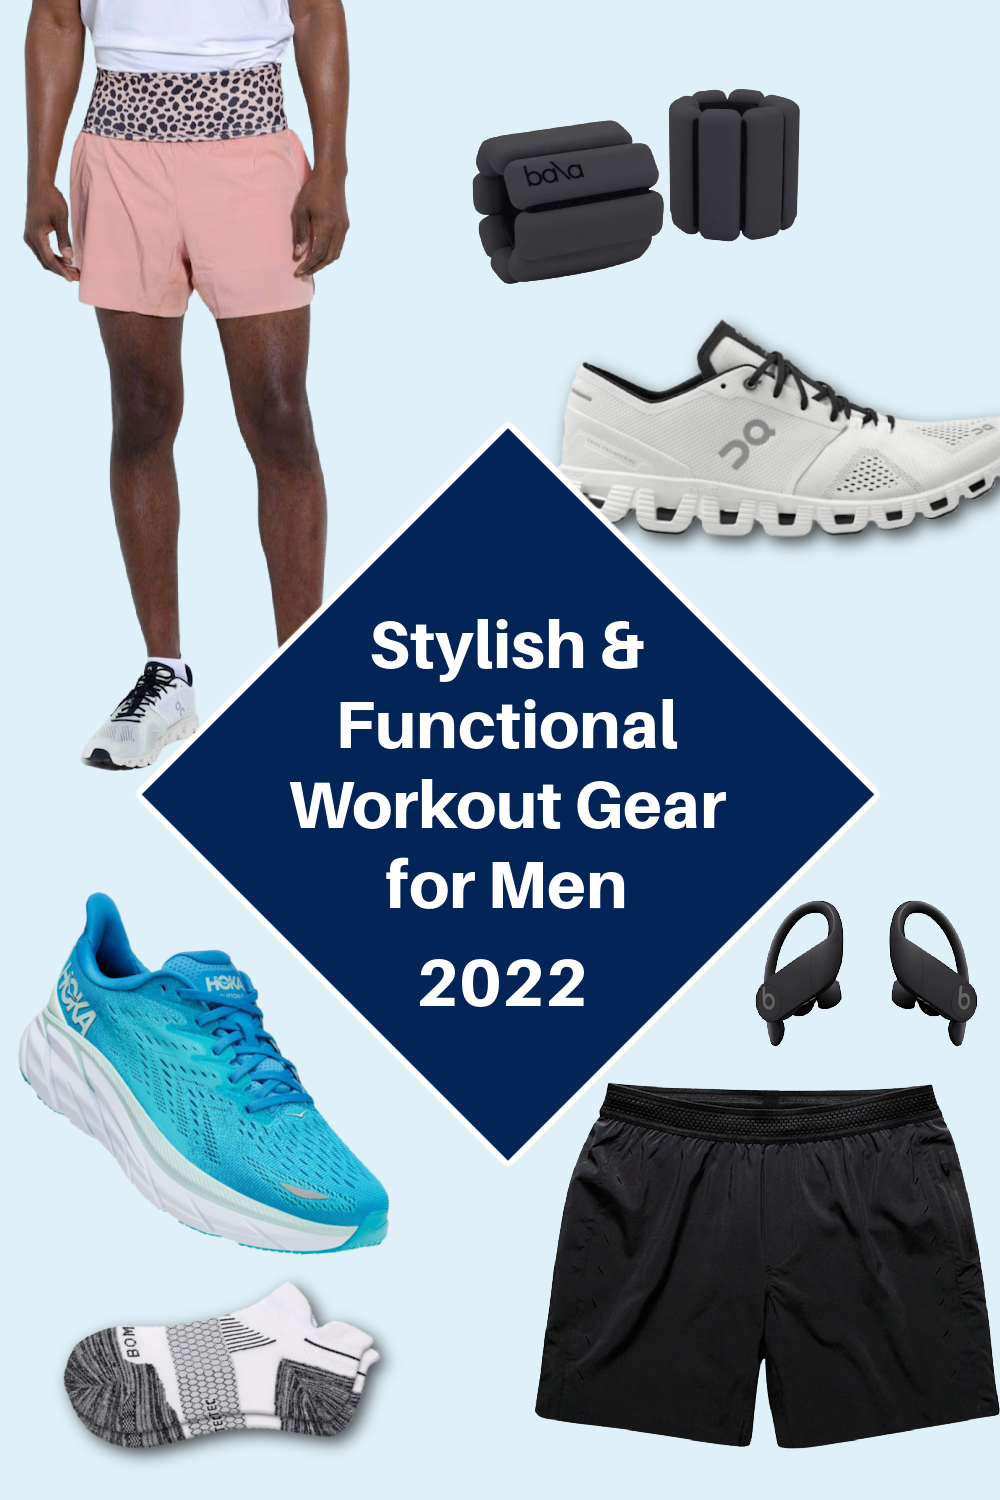 The Best Stylish & Functional Workout Gear for Men in 2022